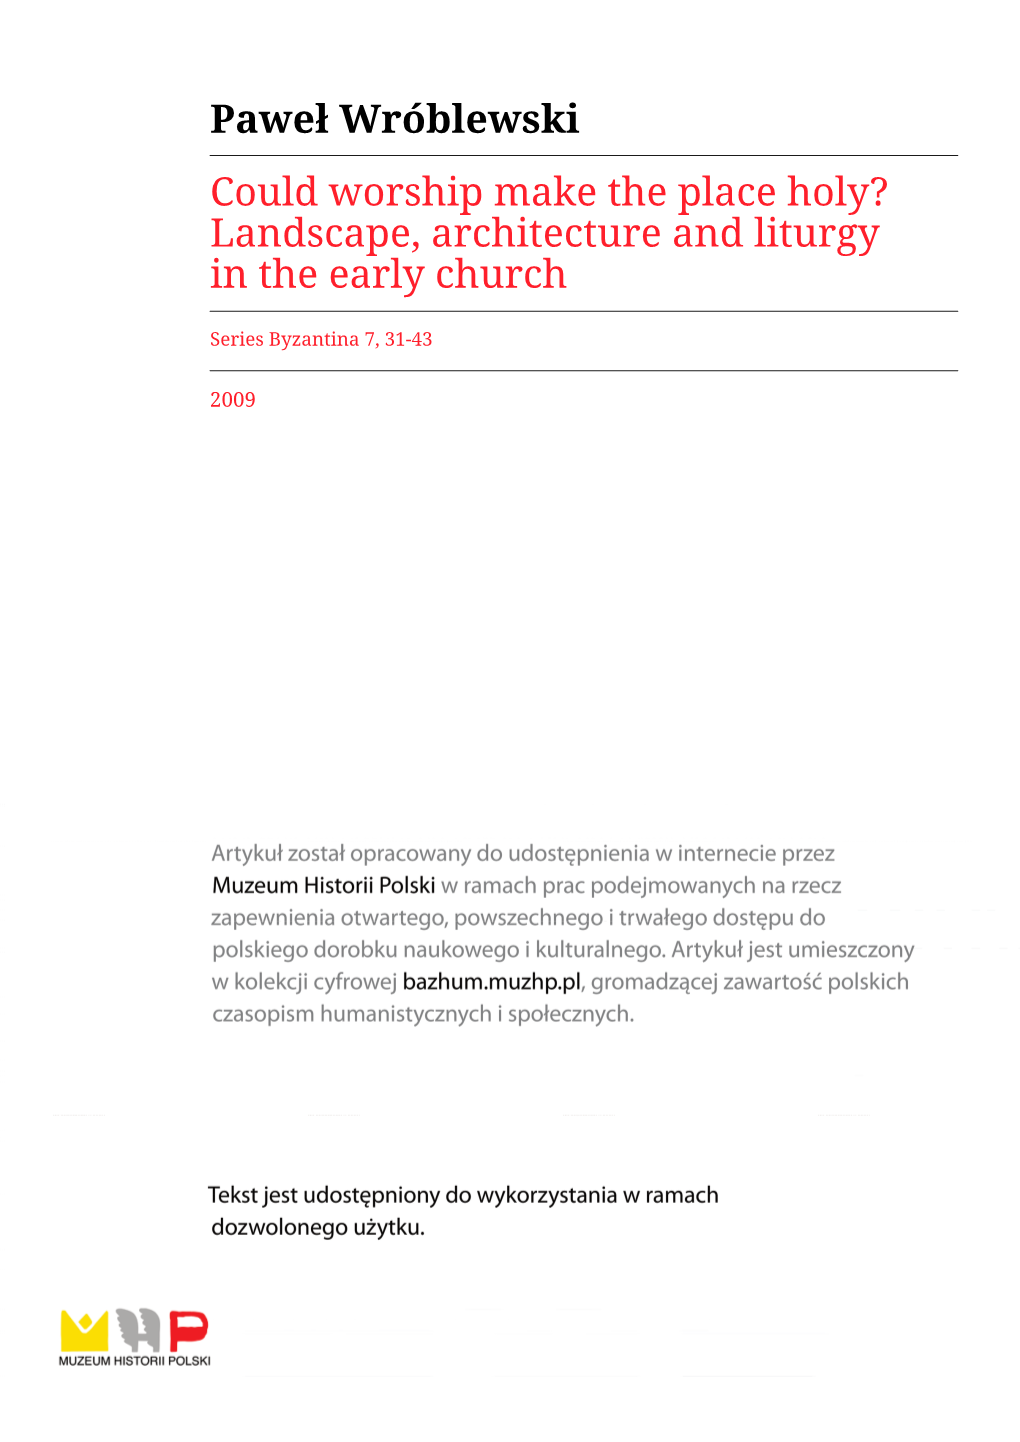 Paweł Wróblewski Could Worship Make the Place Holy? Landscape, Architecture and Liturgy in the Early Church